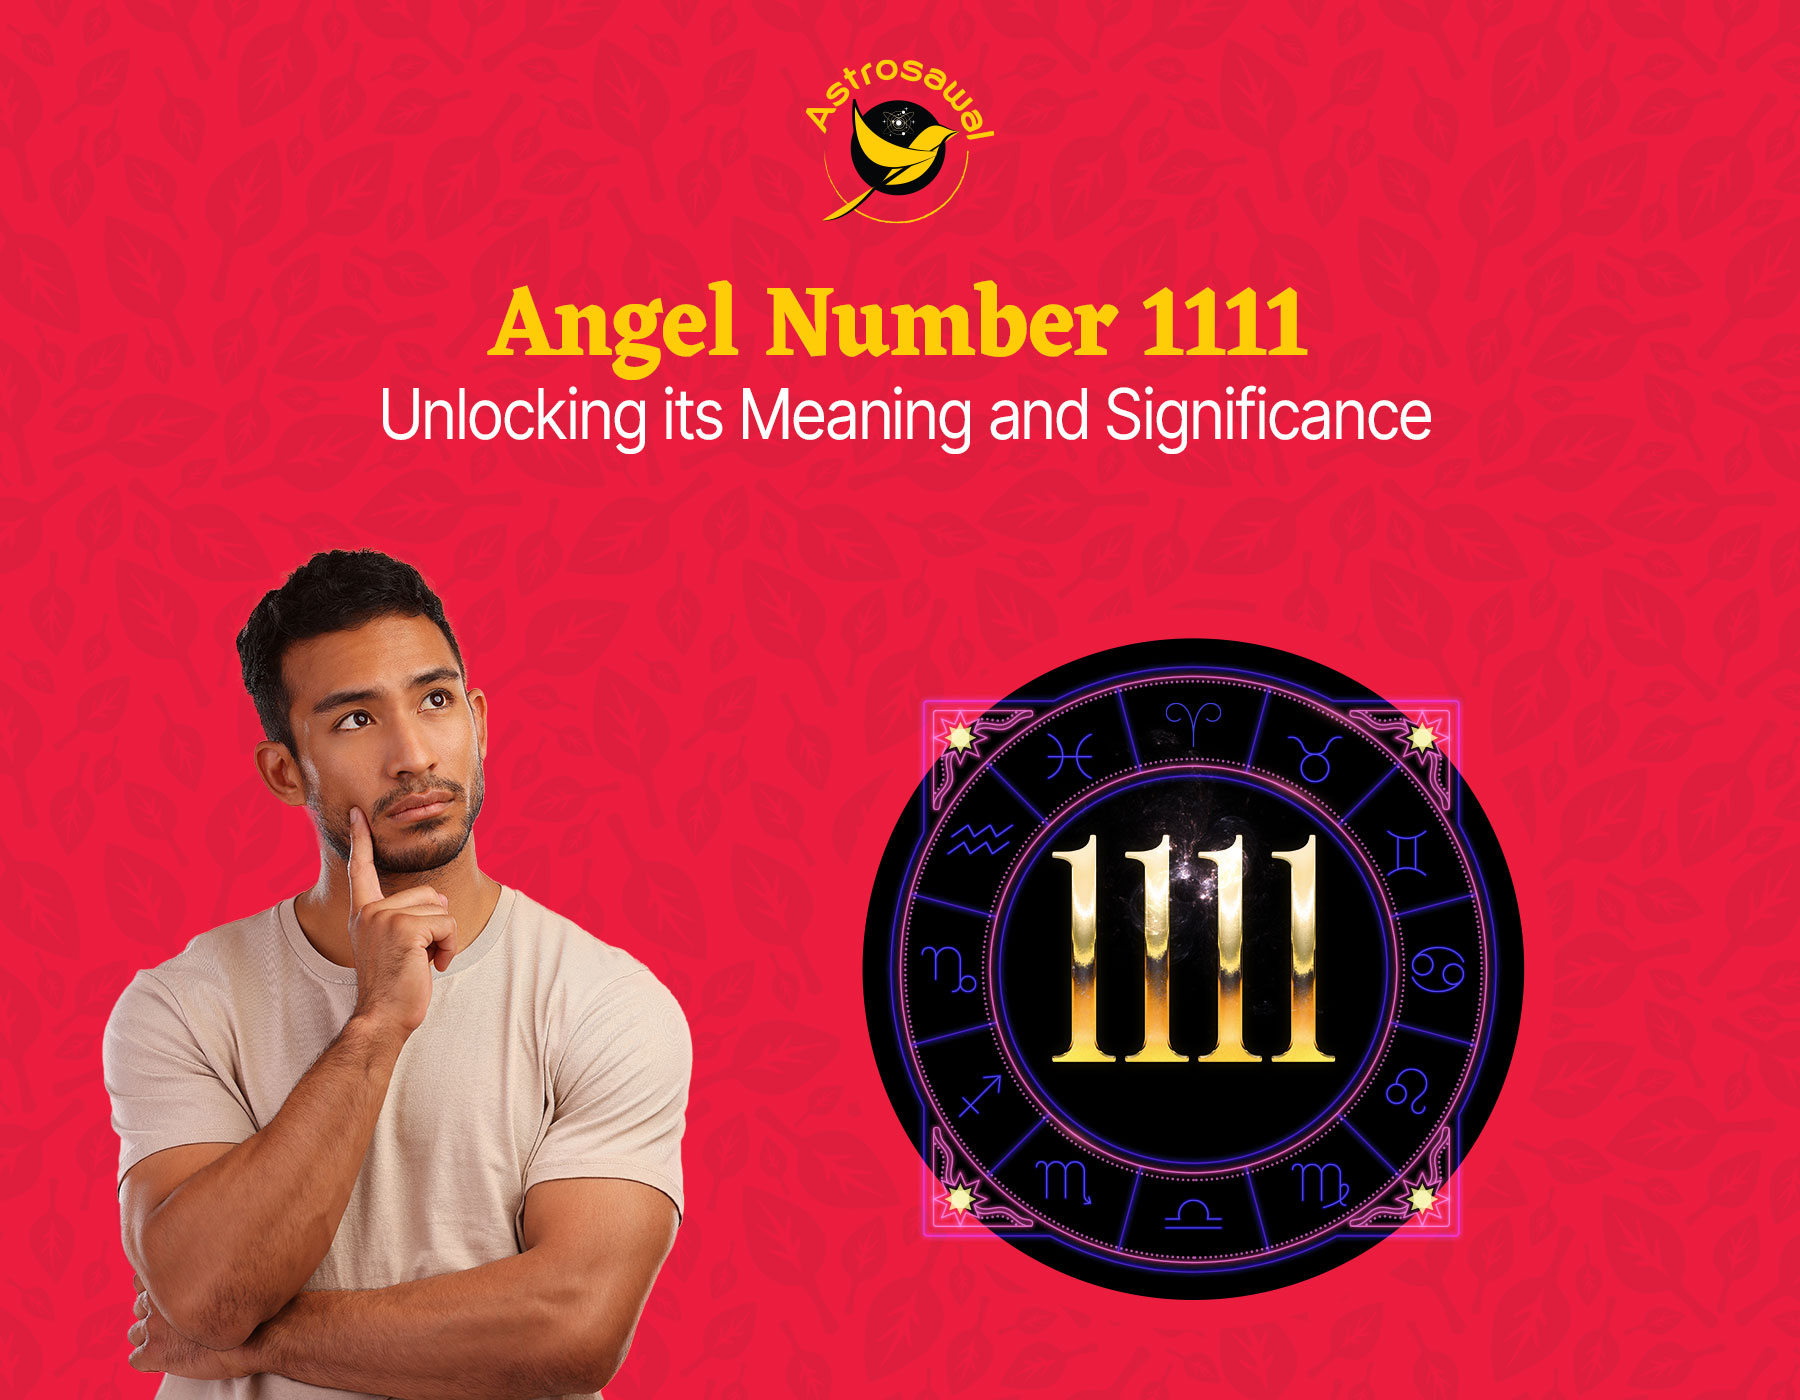 Angel Number 1111: Unlocking its Meaning and Significance